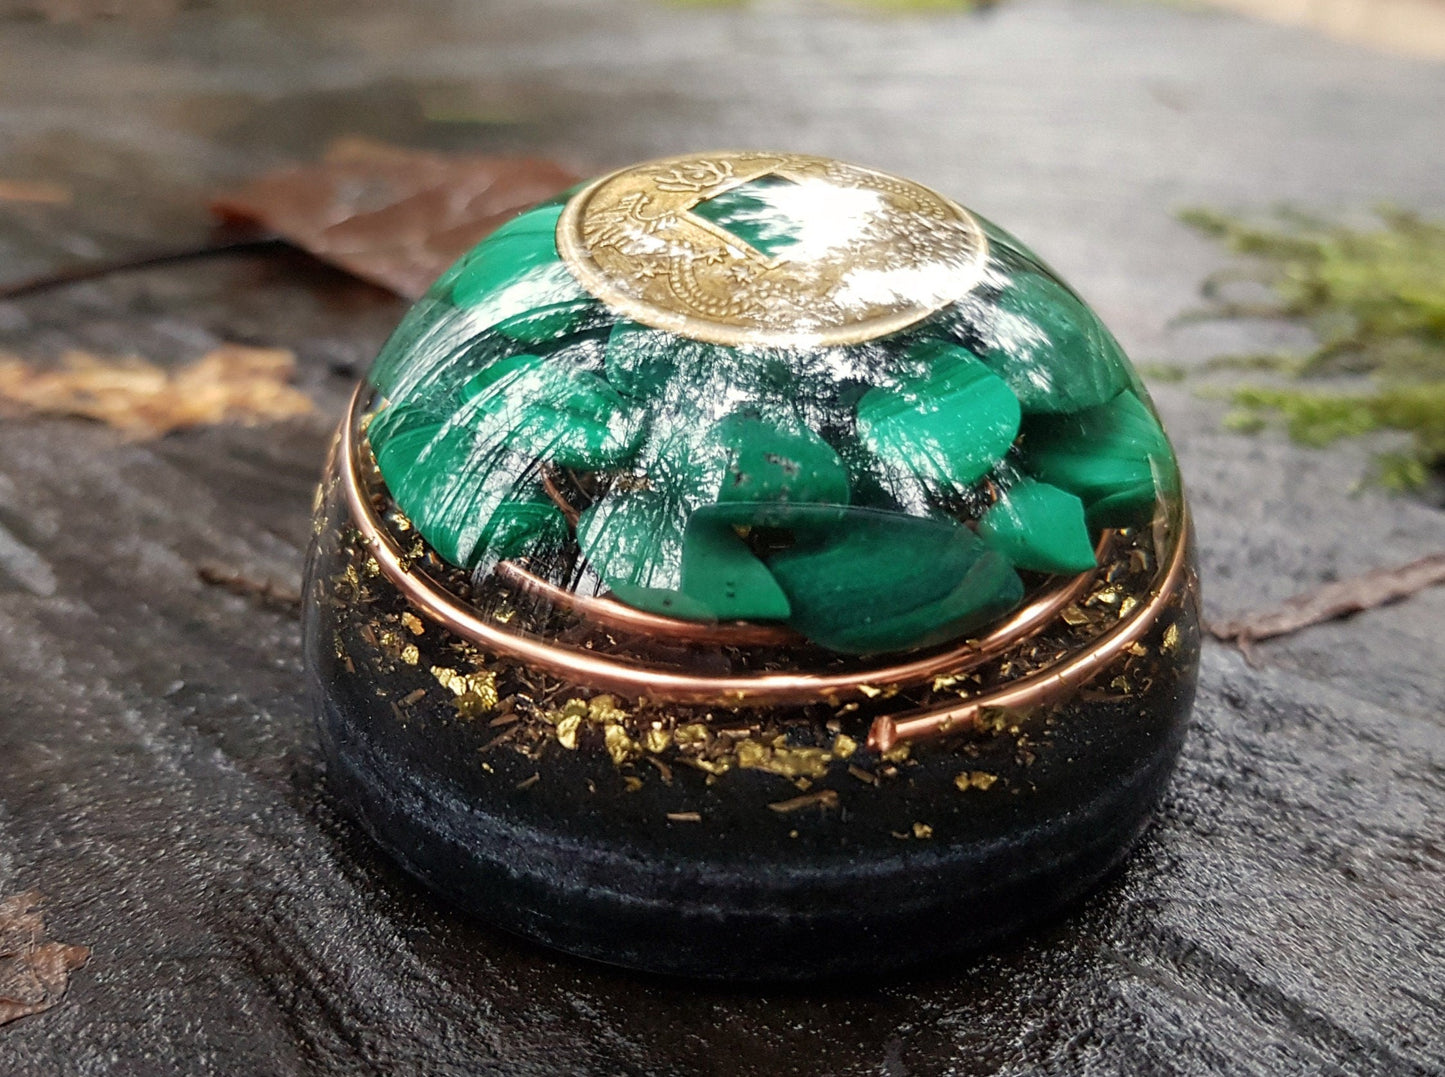 Orgonite dome hemisphere with malachite and wealth coin